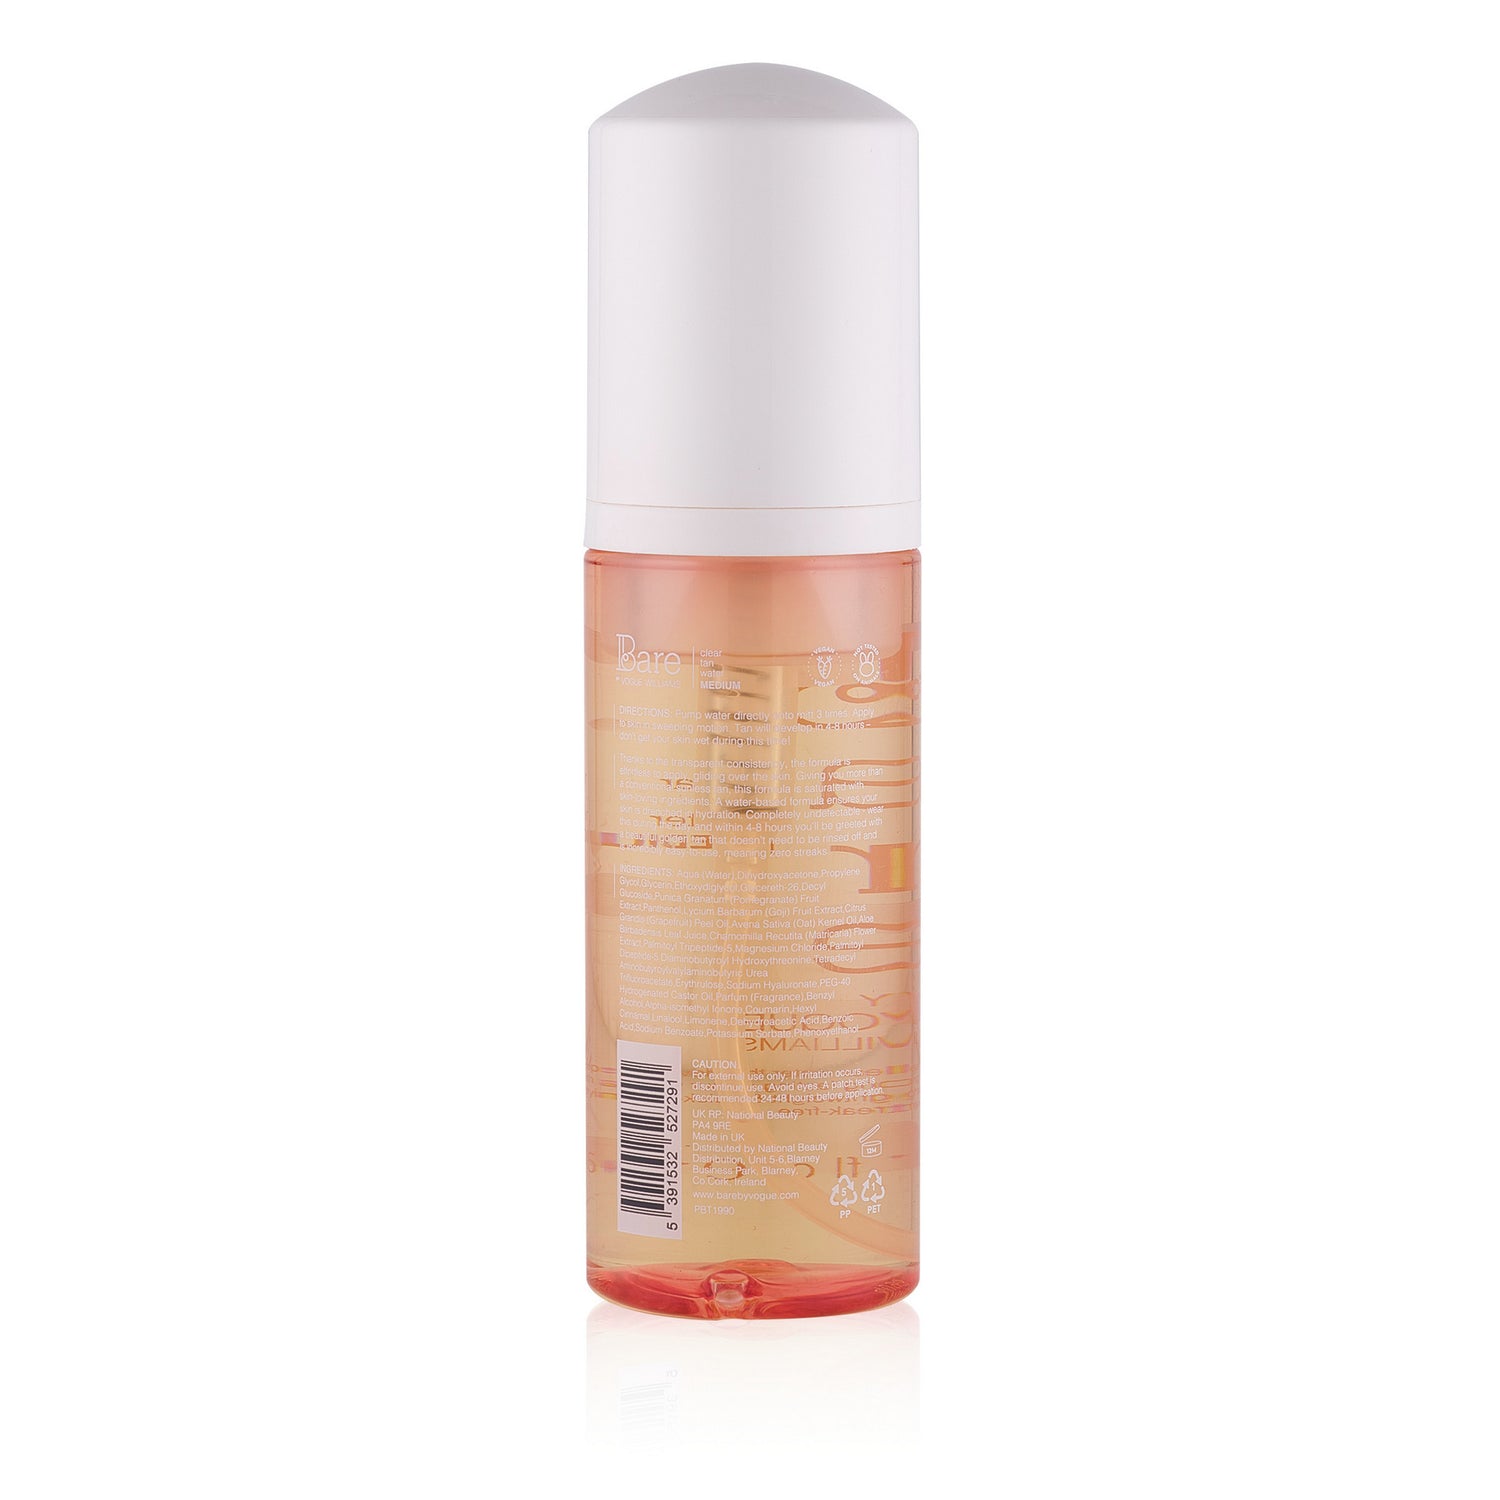 Bare by Vogue - Clear Tan Water - Medium